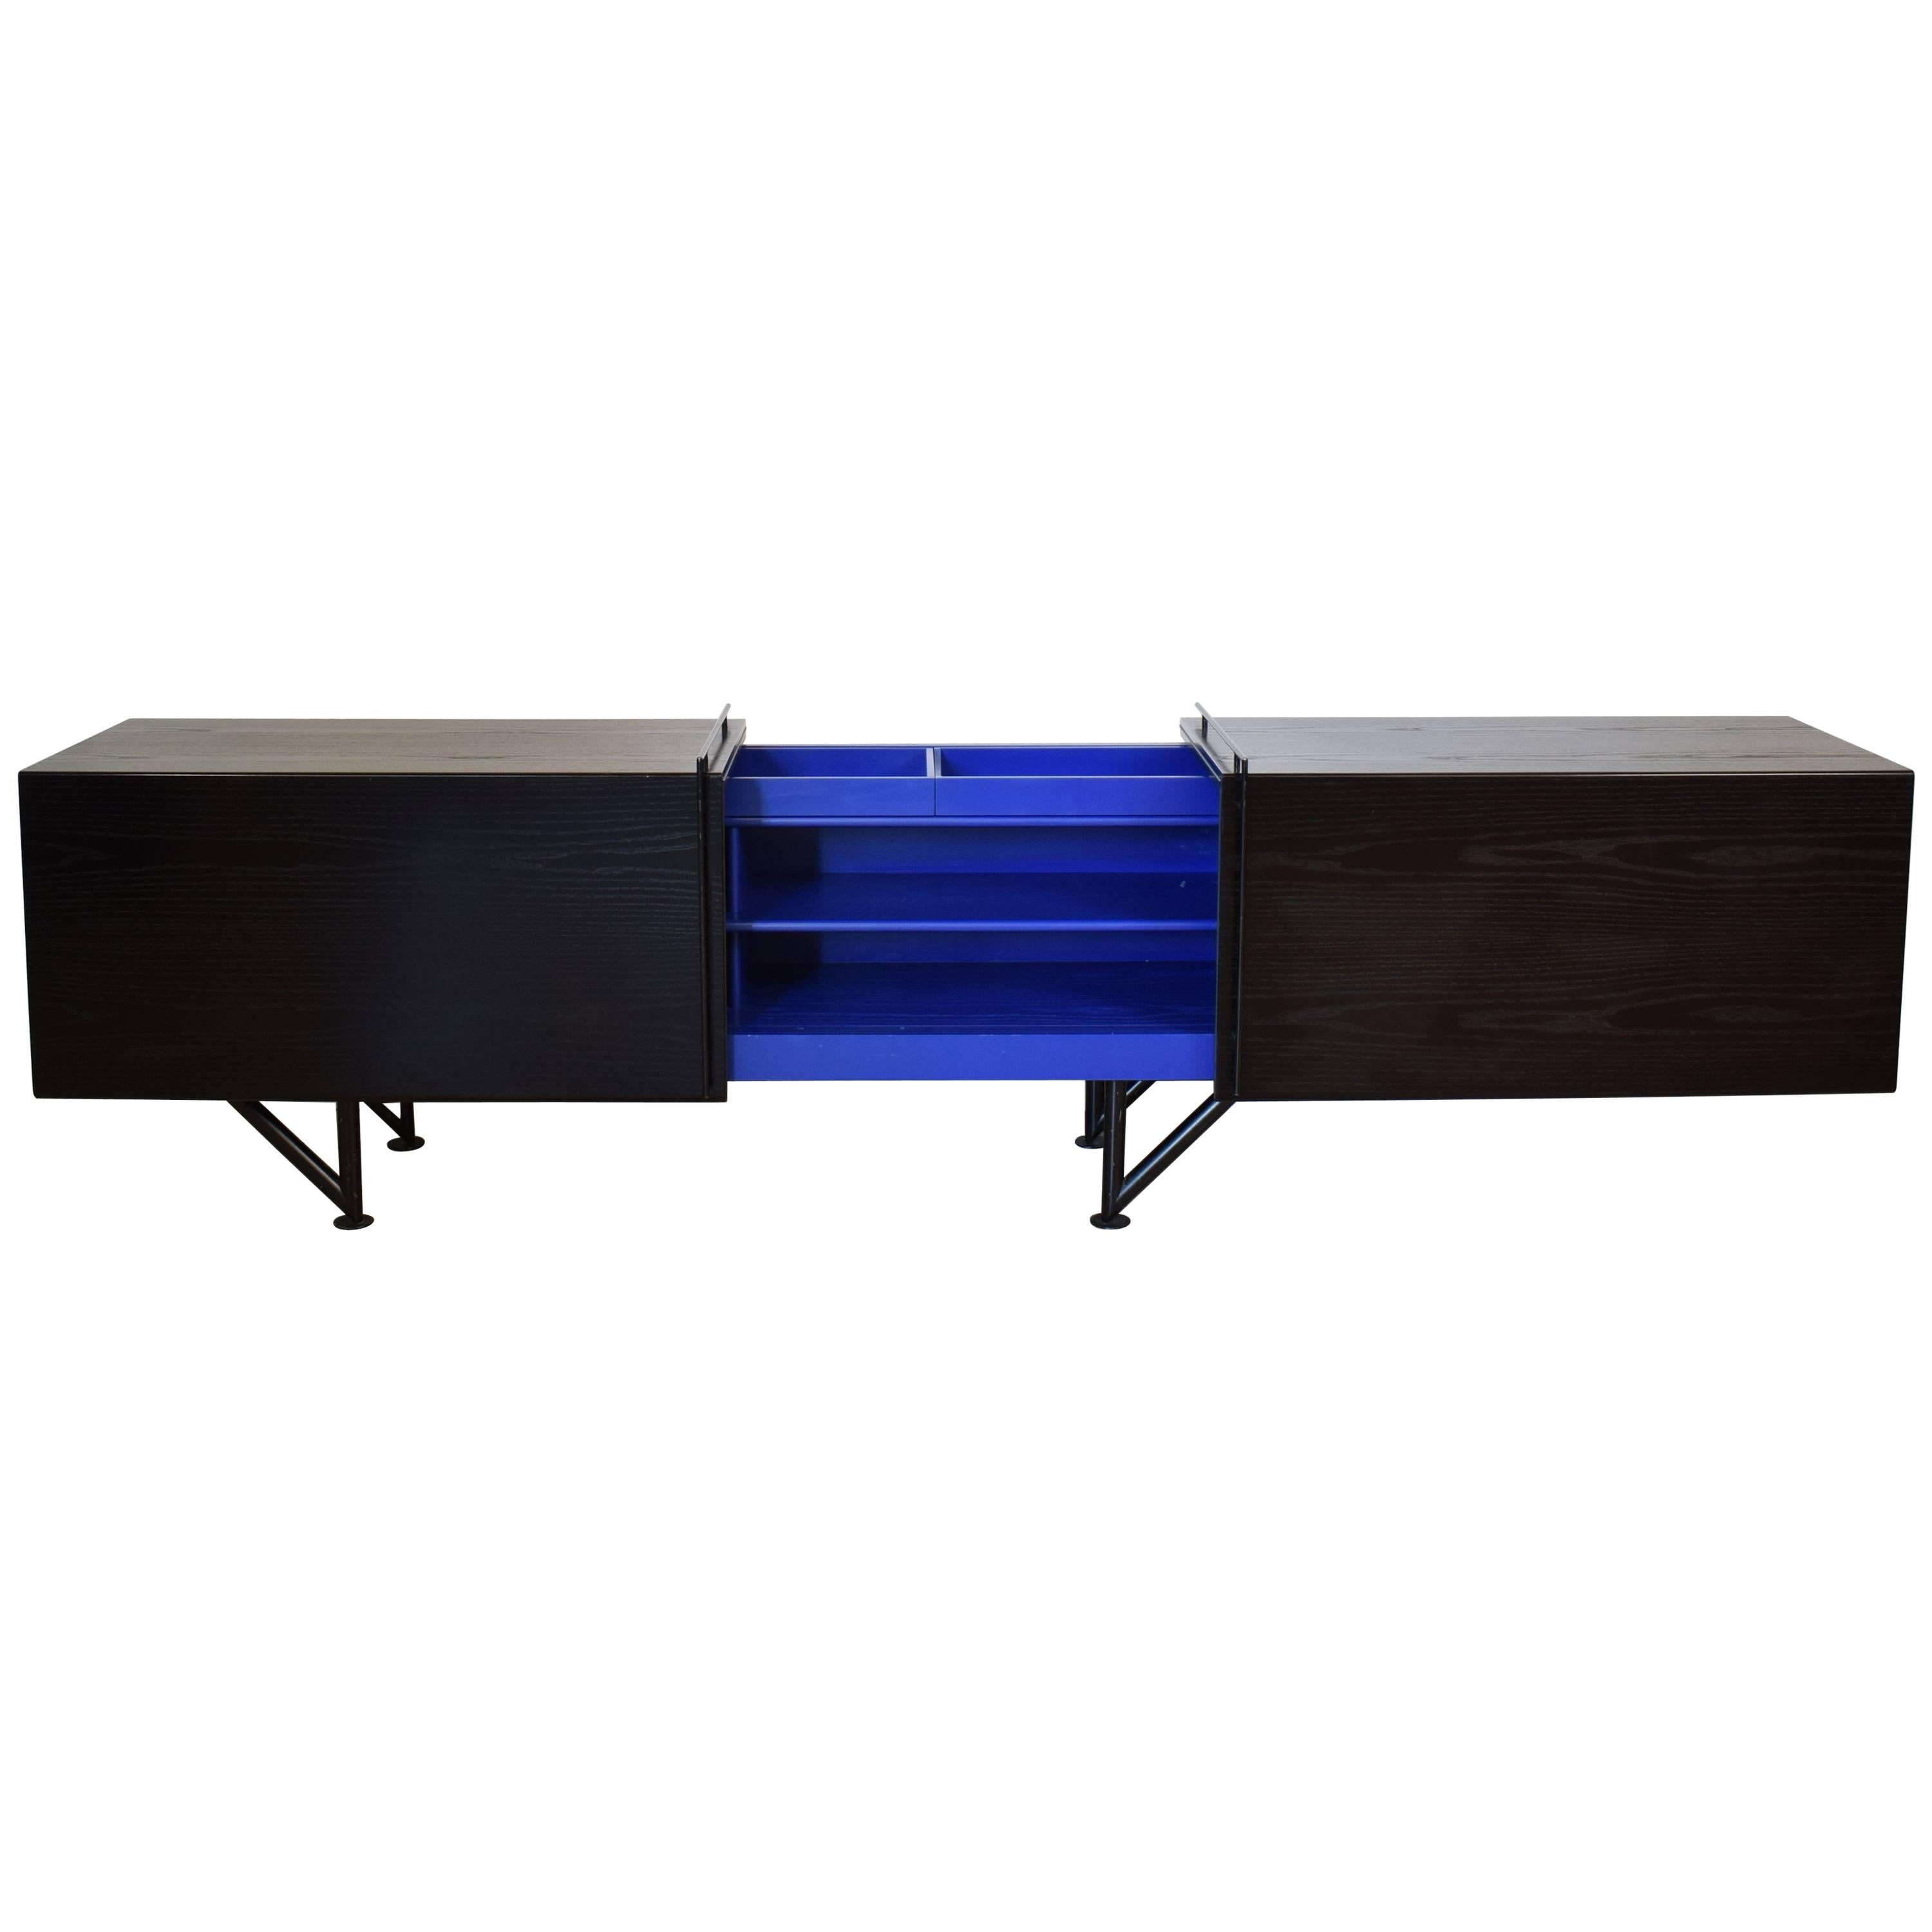 Postmodern Memphis Group Style Sideboard in Black and Blue, 1980s For Sale